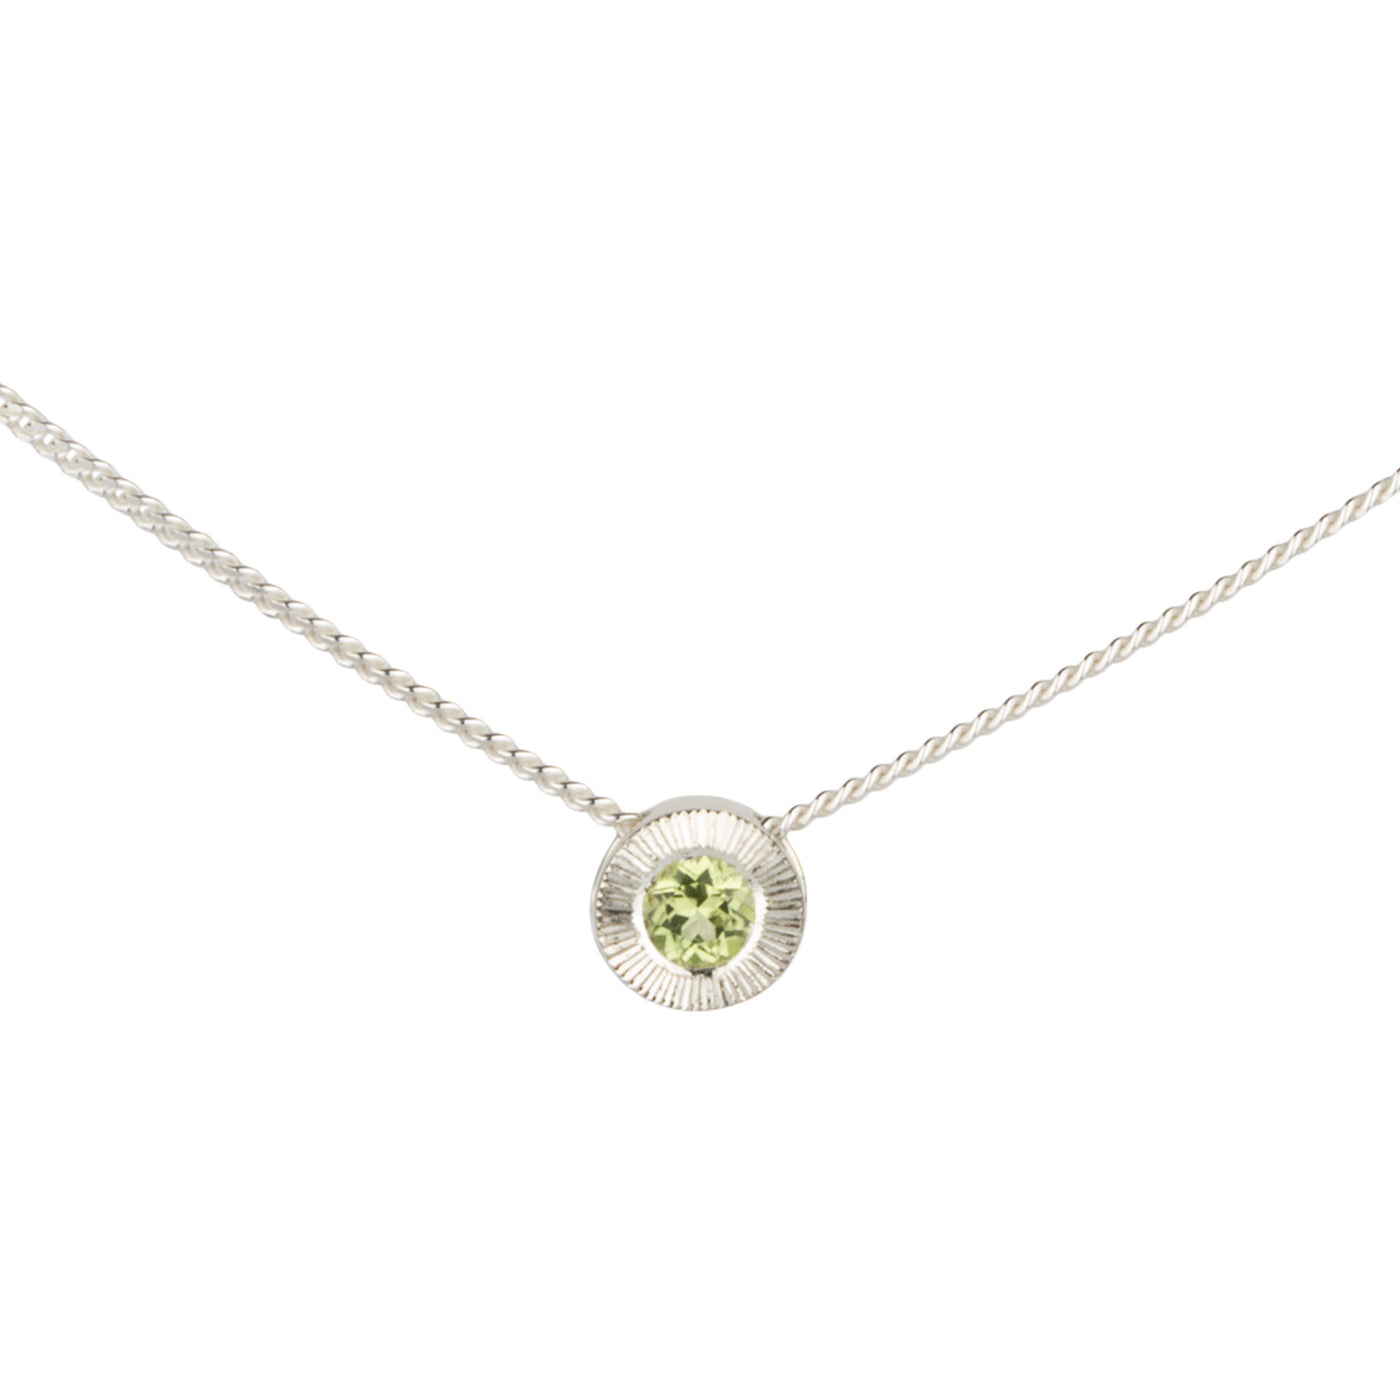 August birthstone Aurora slide necklace with peridot in silver